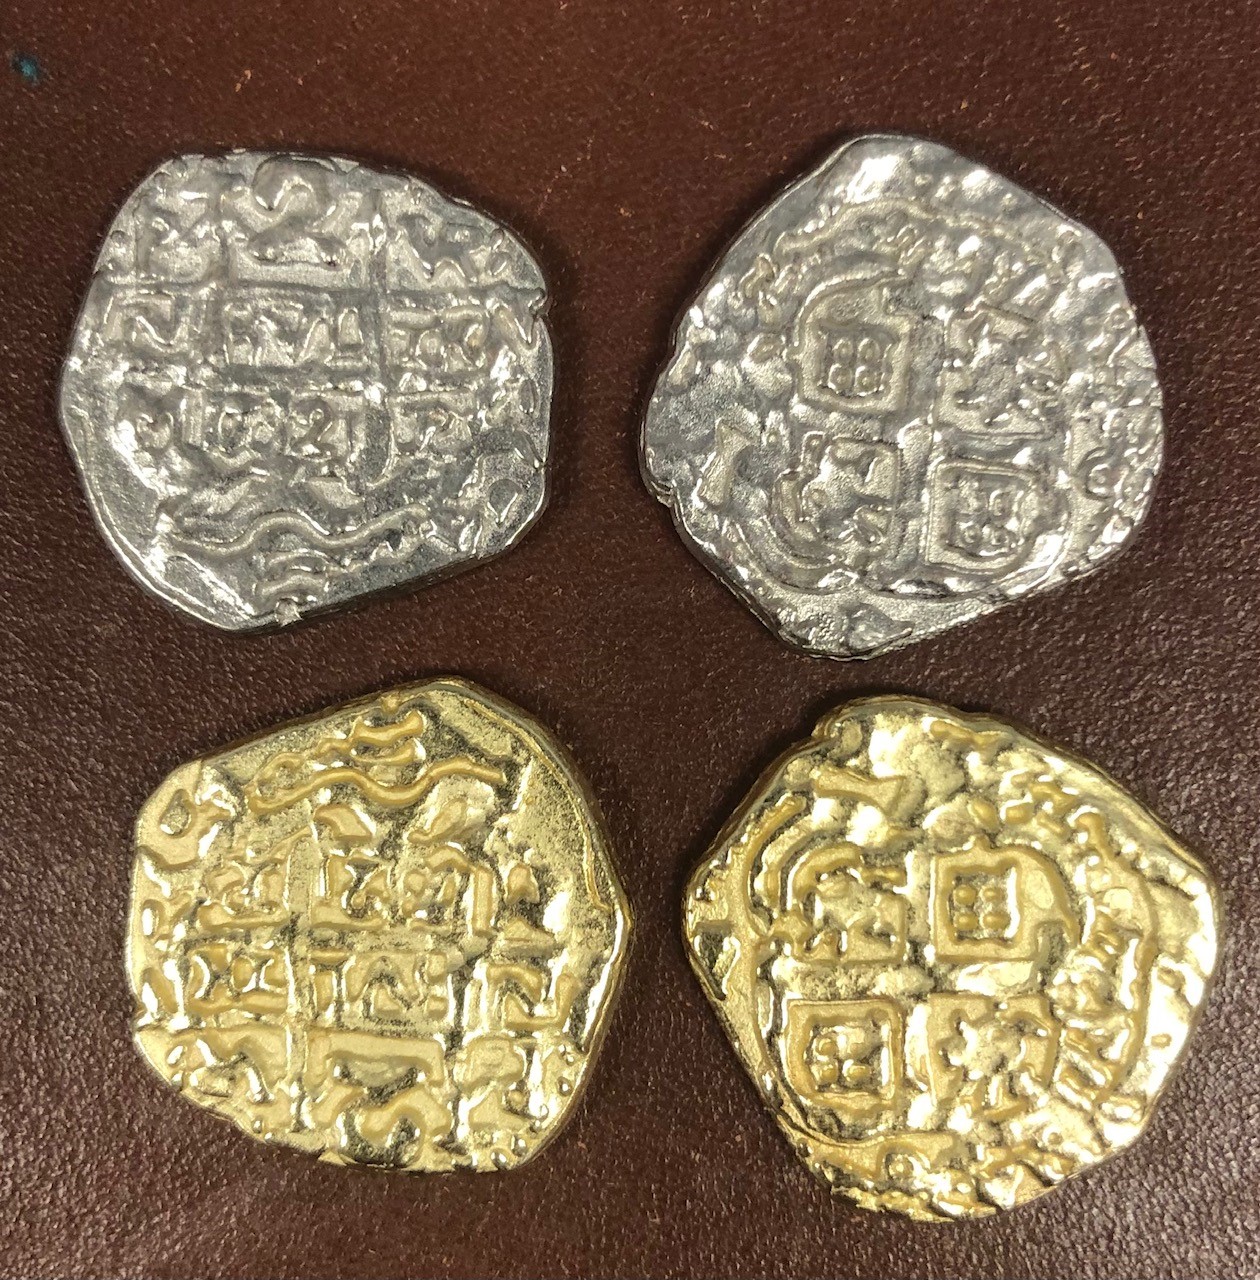 CARIBBEAN SPANISH GOLD DOUBLOONS HISTORICAL REPLICA COINS 4 PIECES 